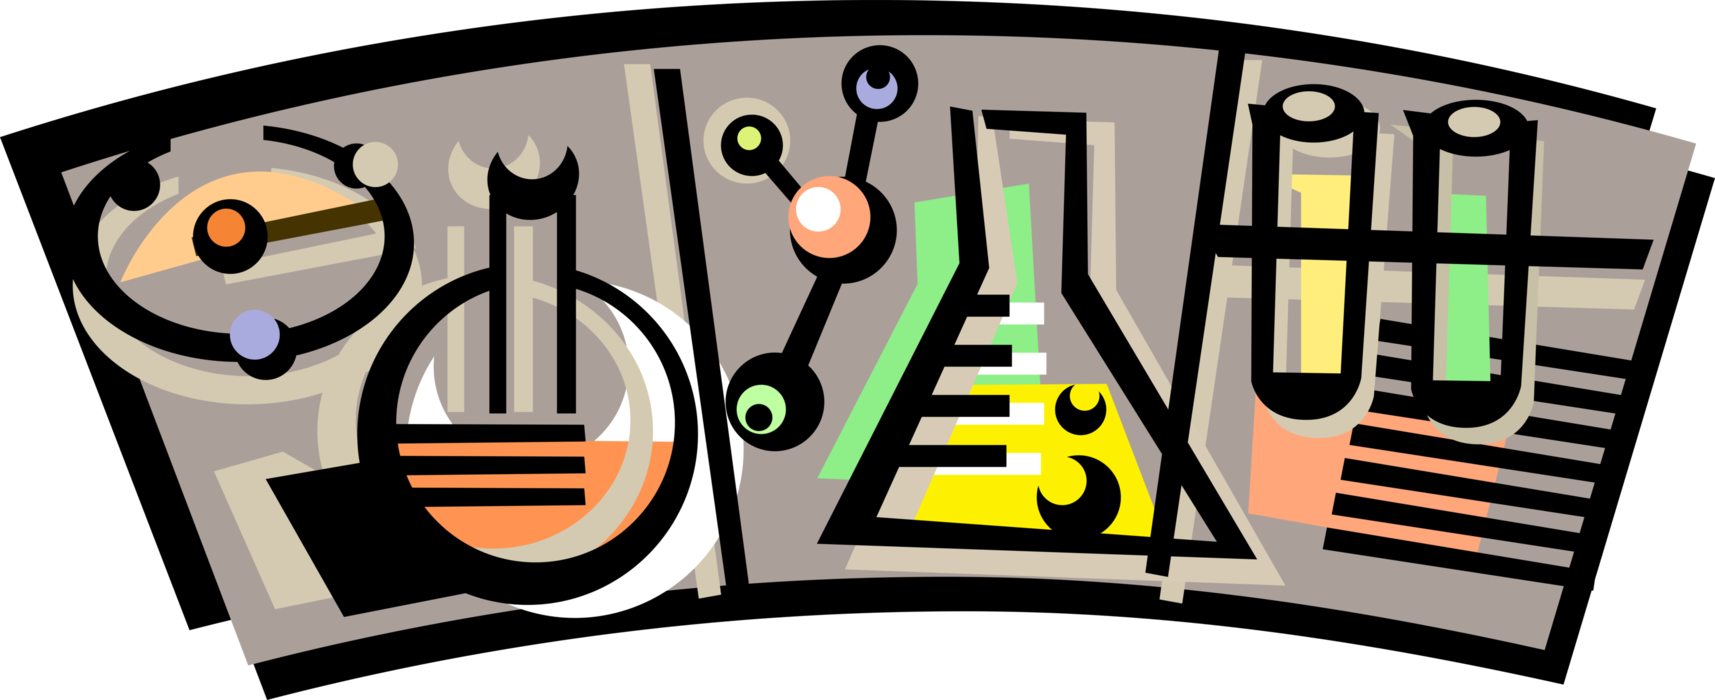 Vector Illustration of Science Laboratory Flasks, Beakers and Test Tubes used in Scientific Experiments